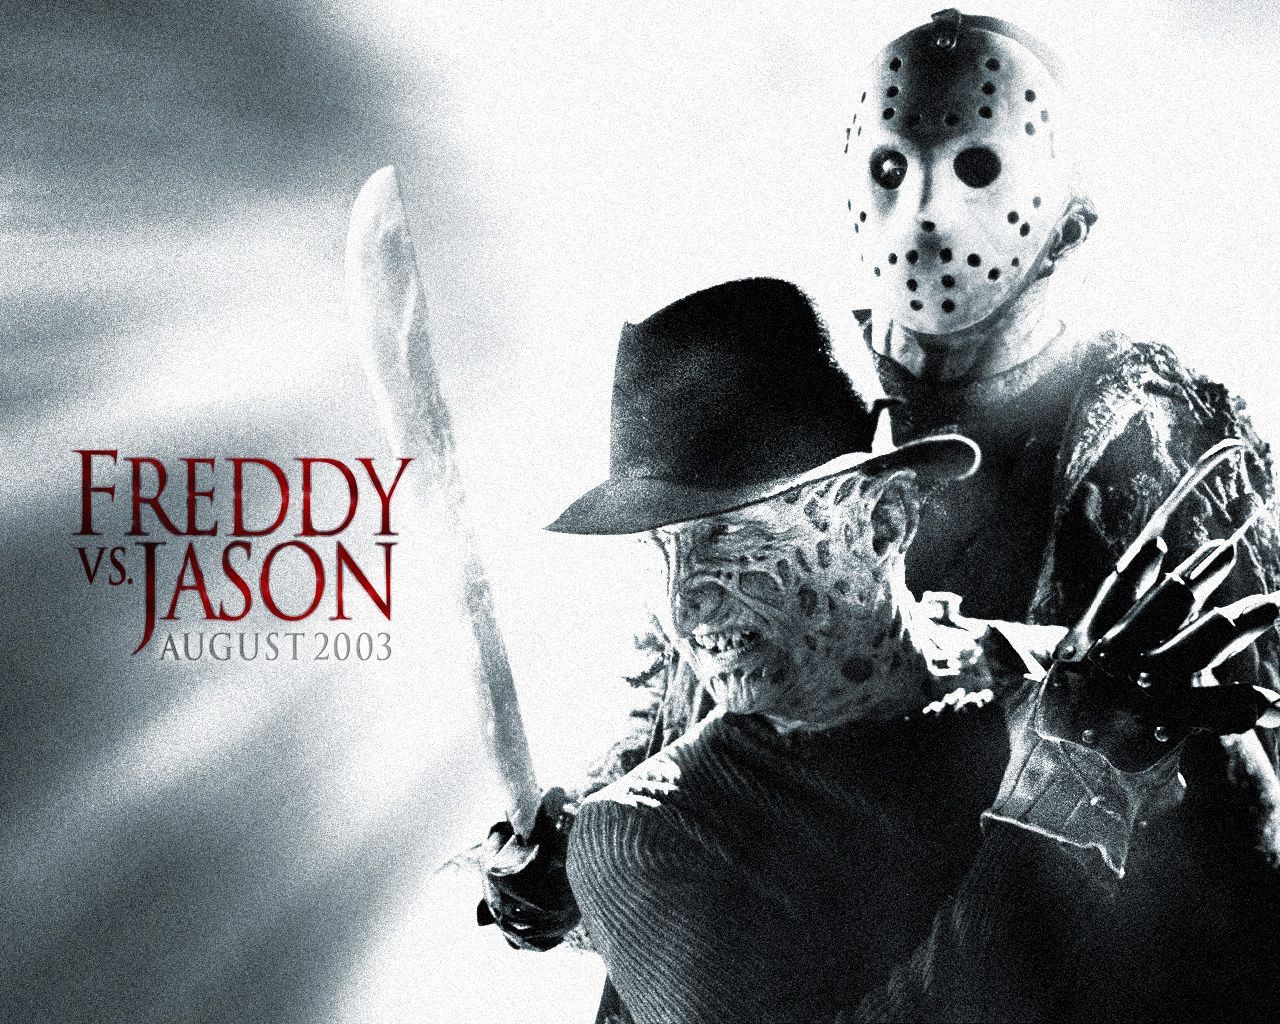 Freddy Vs Jason Image Death Match HD Wallpaper And Background Photos